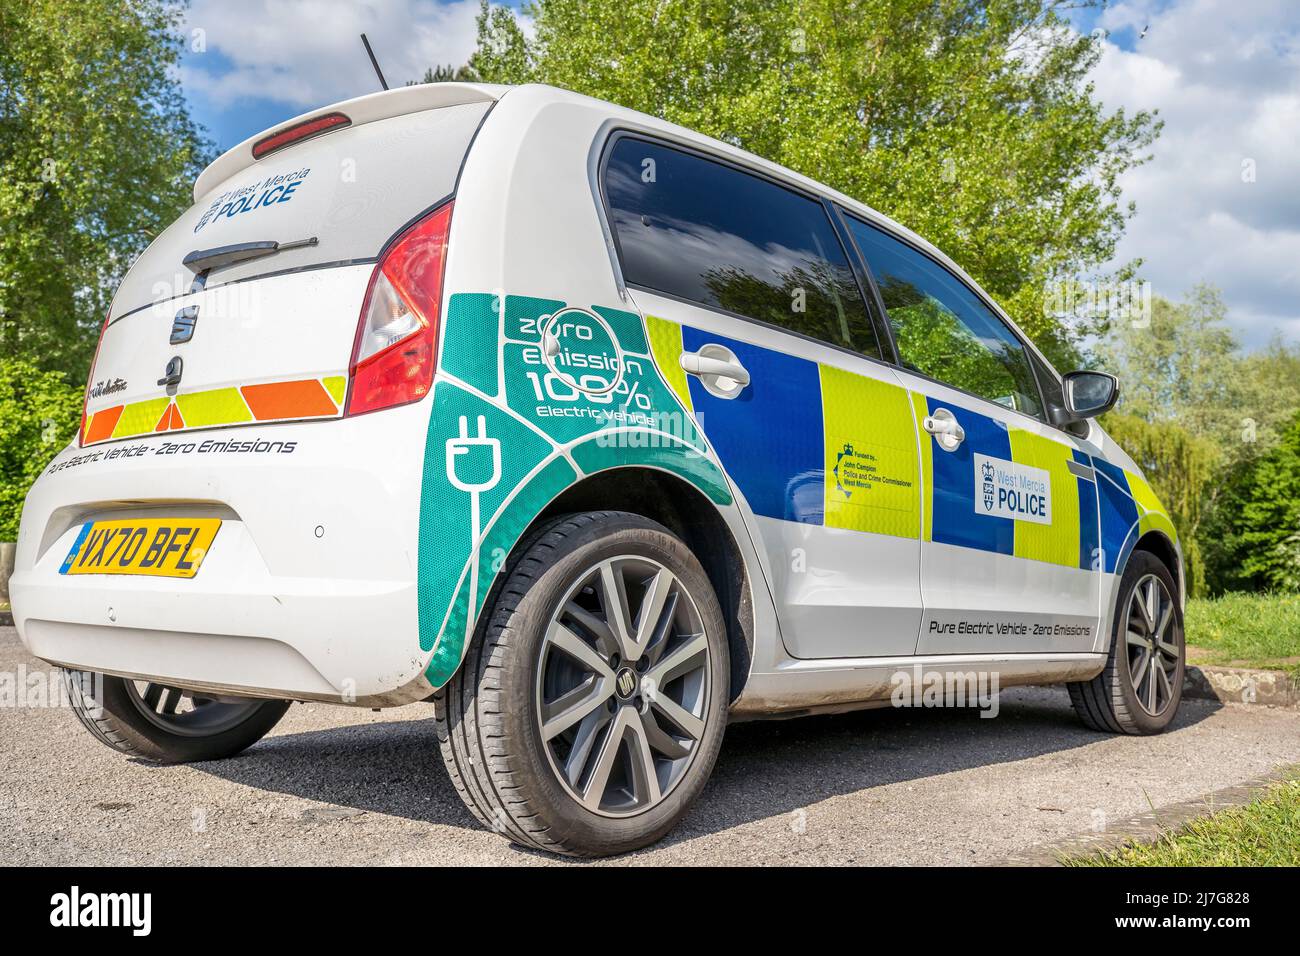 Electric, Zero emission police car - offside, rear view. Stock Photo